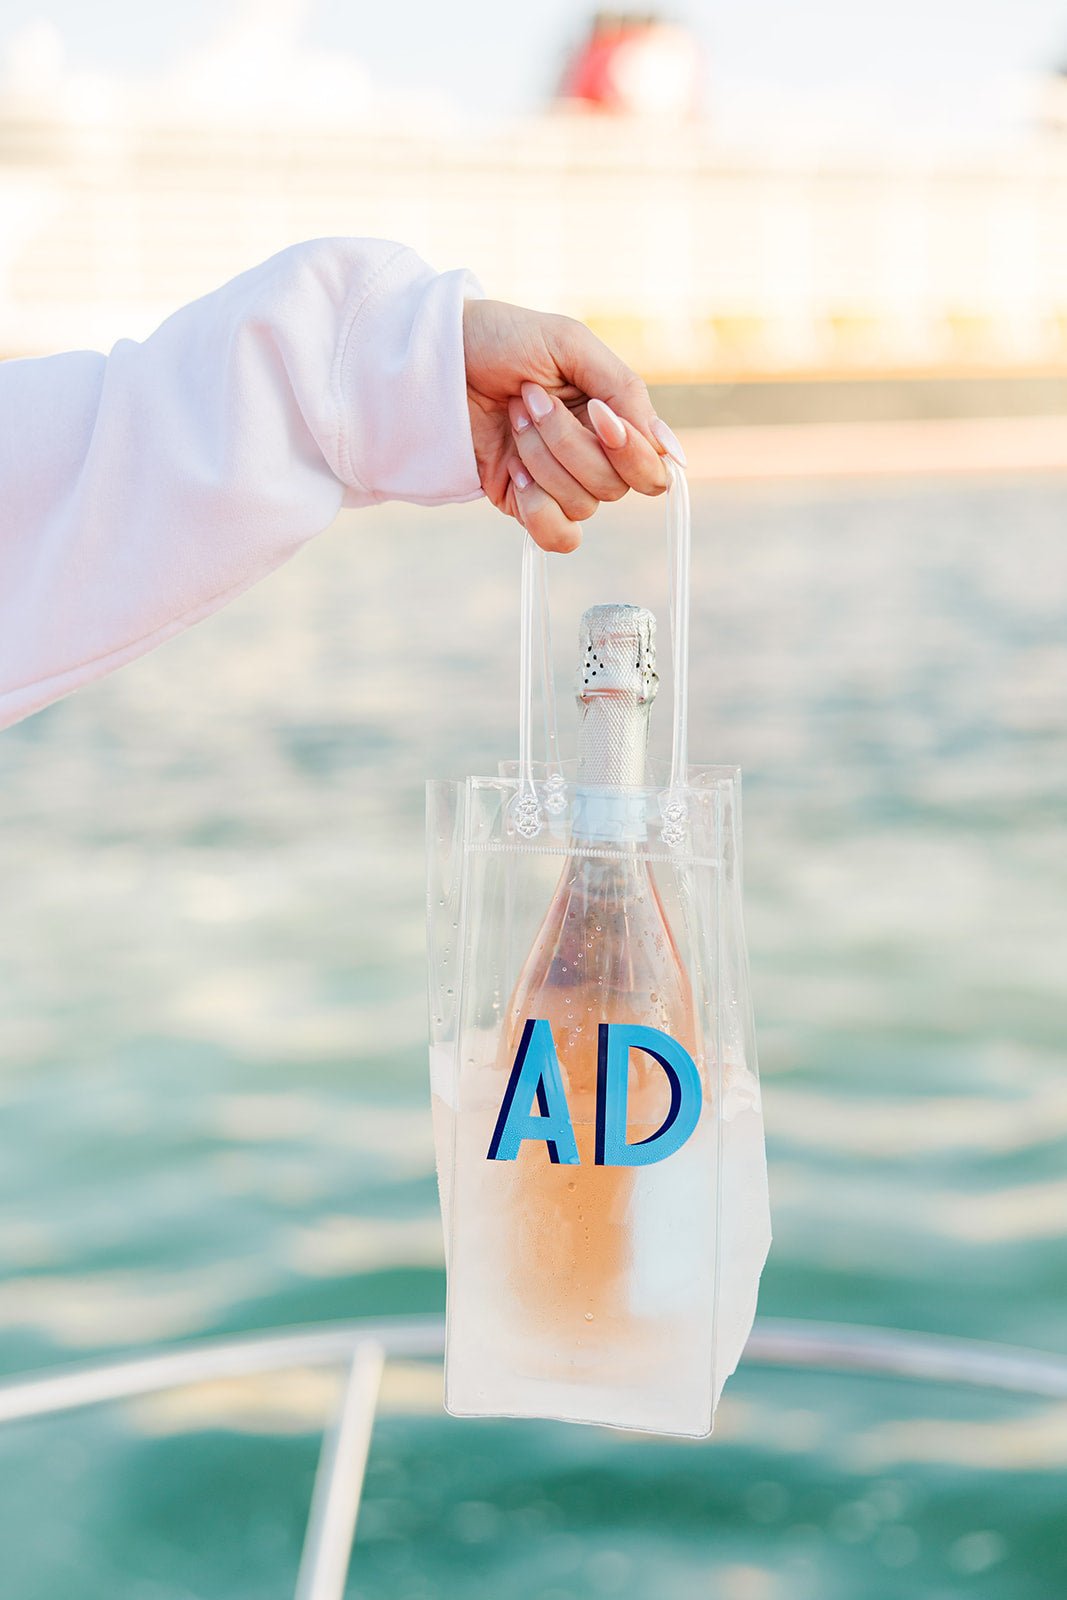 A clear wine bag that is customized with a monogram in blue writing